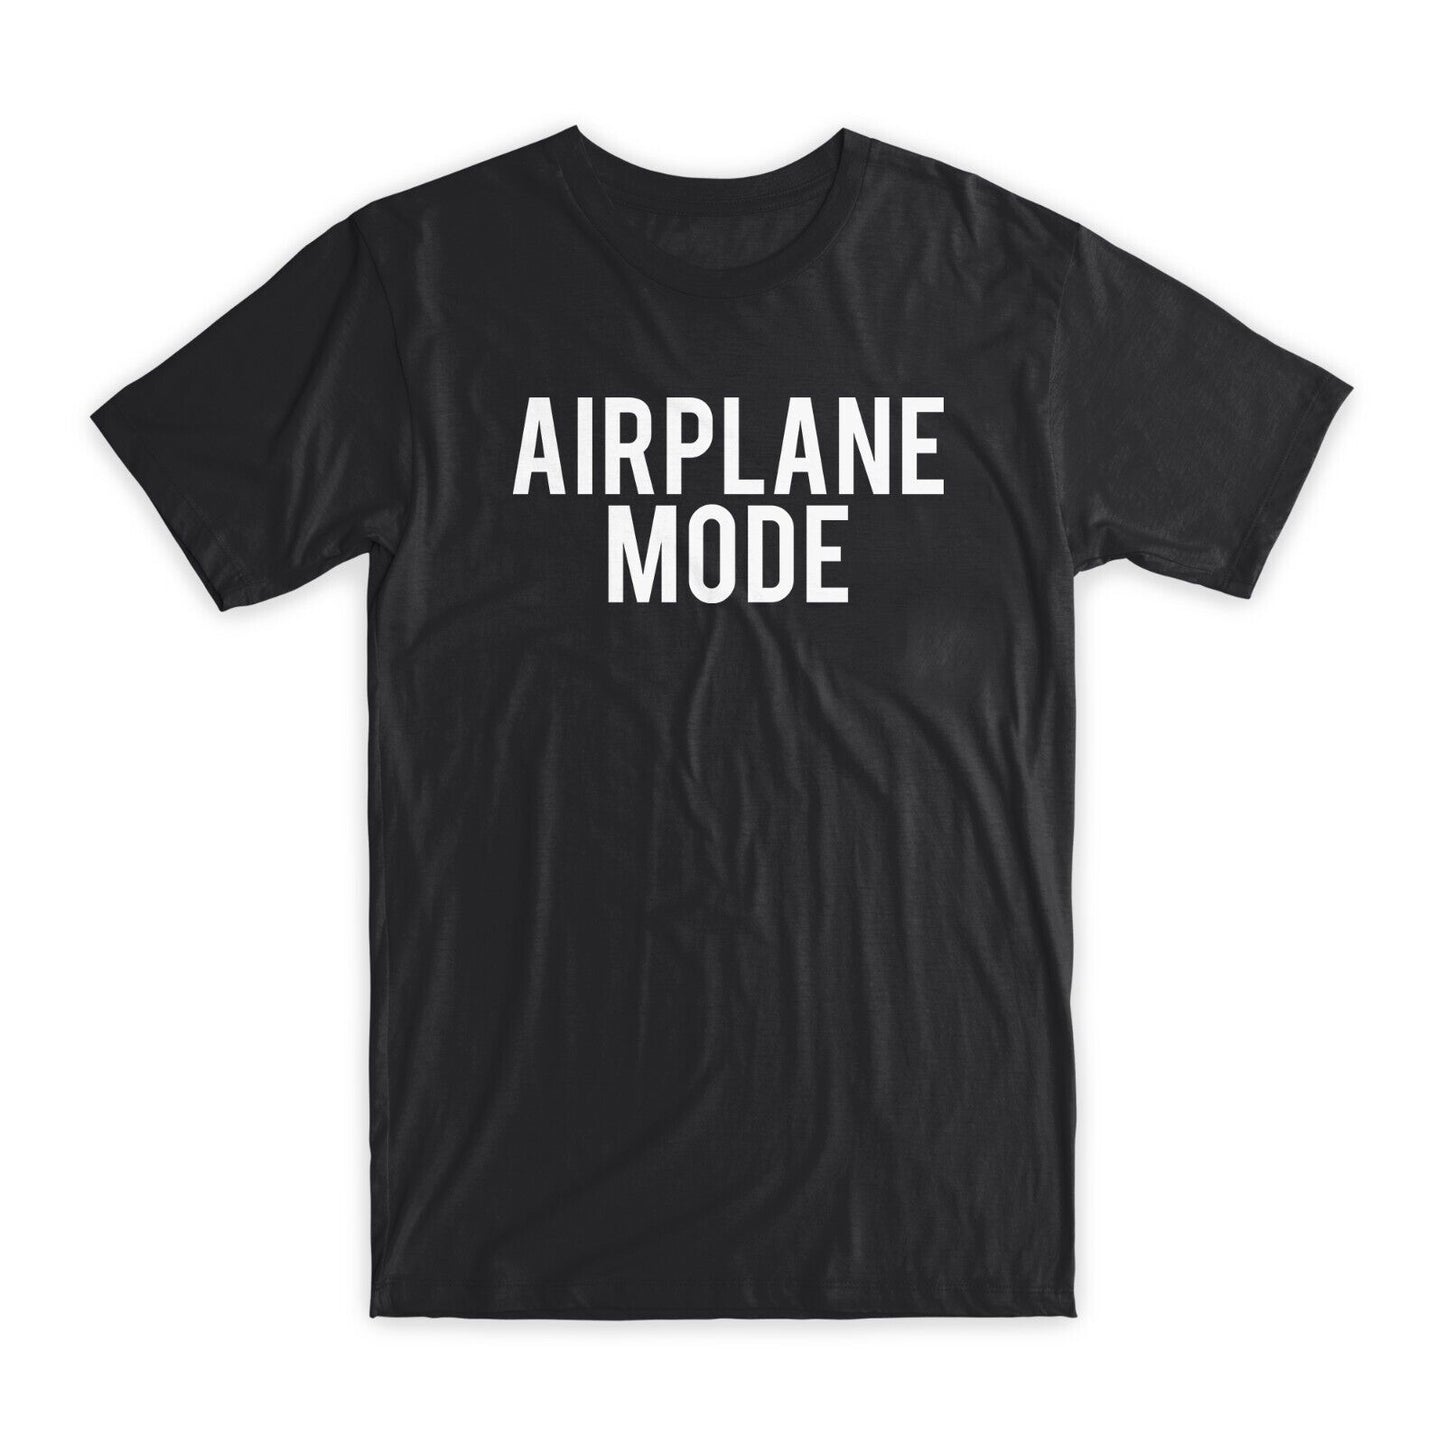 Airplane Mode T-Shirt Premium Soft Cotton Crew Neck Funny Tees Novelty Gifts NEW